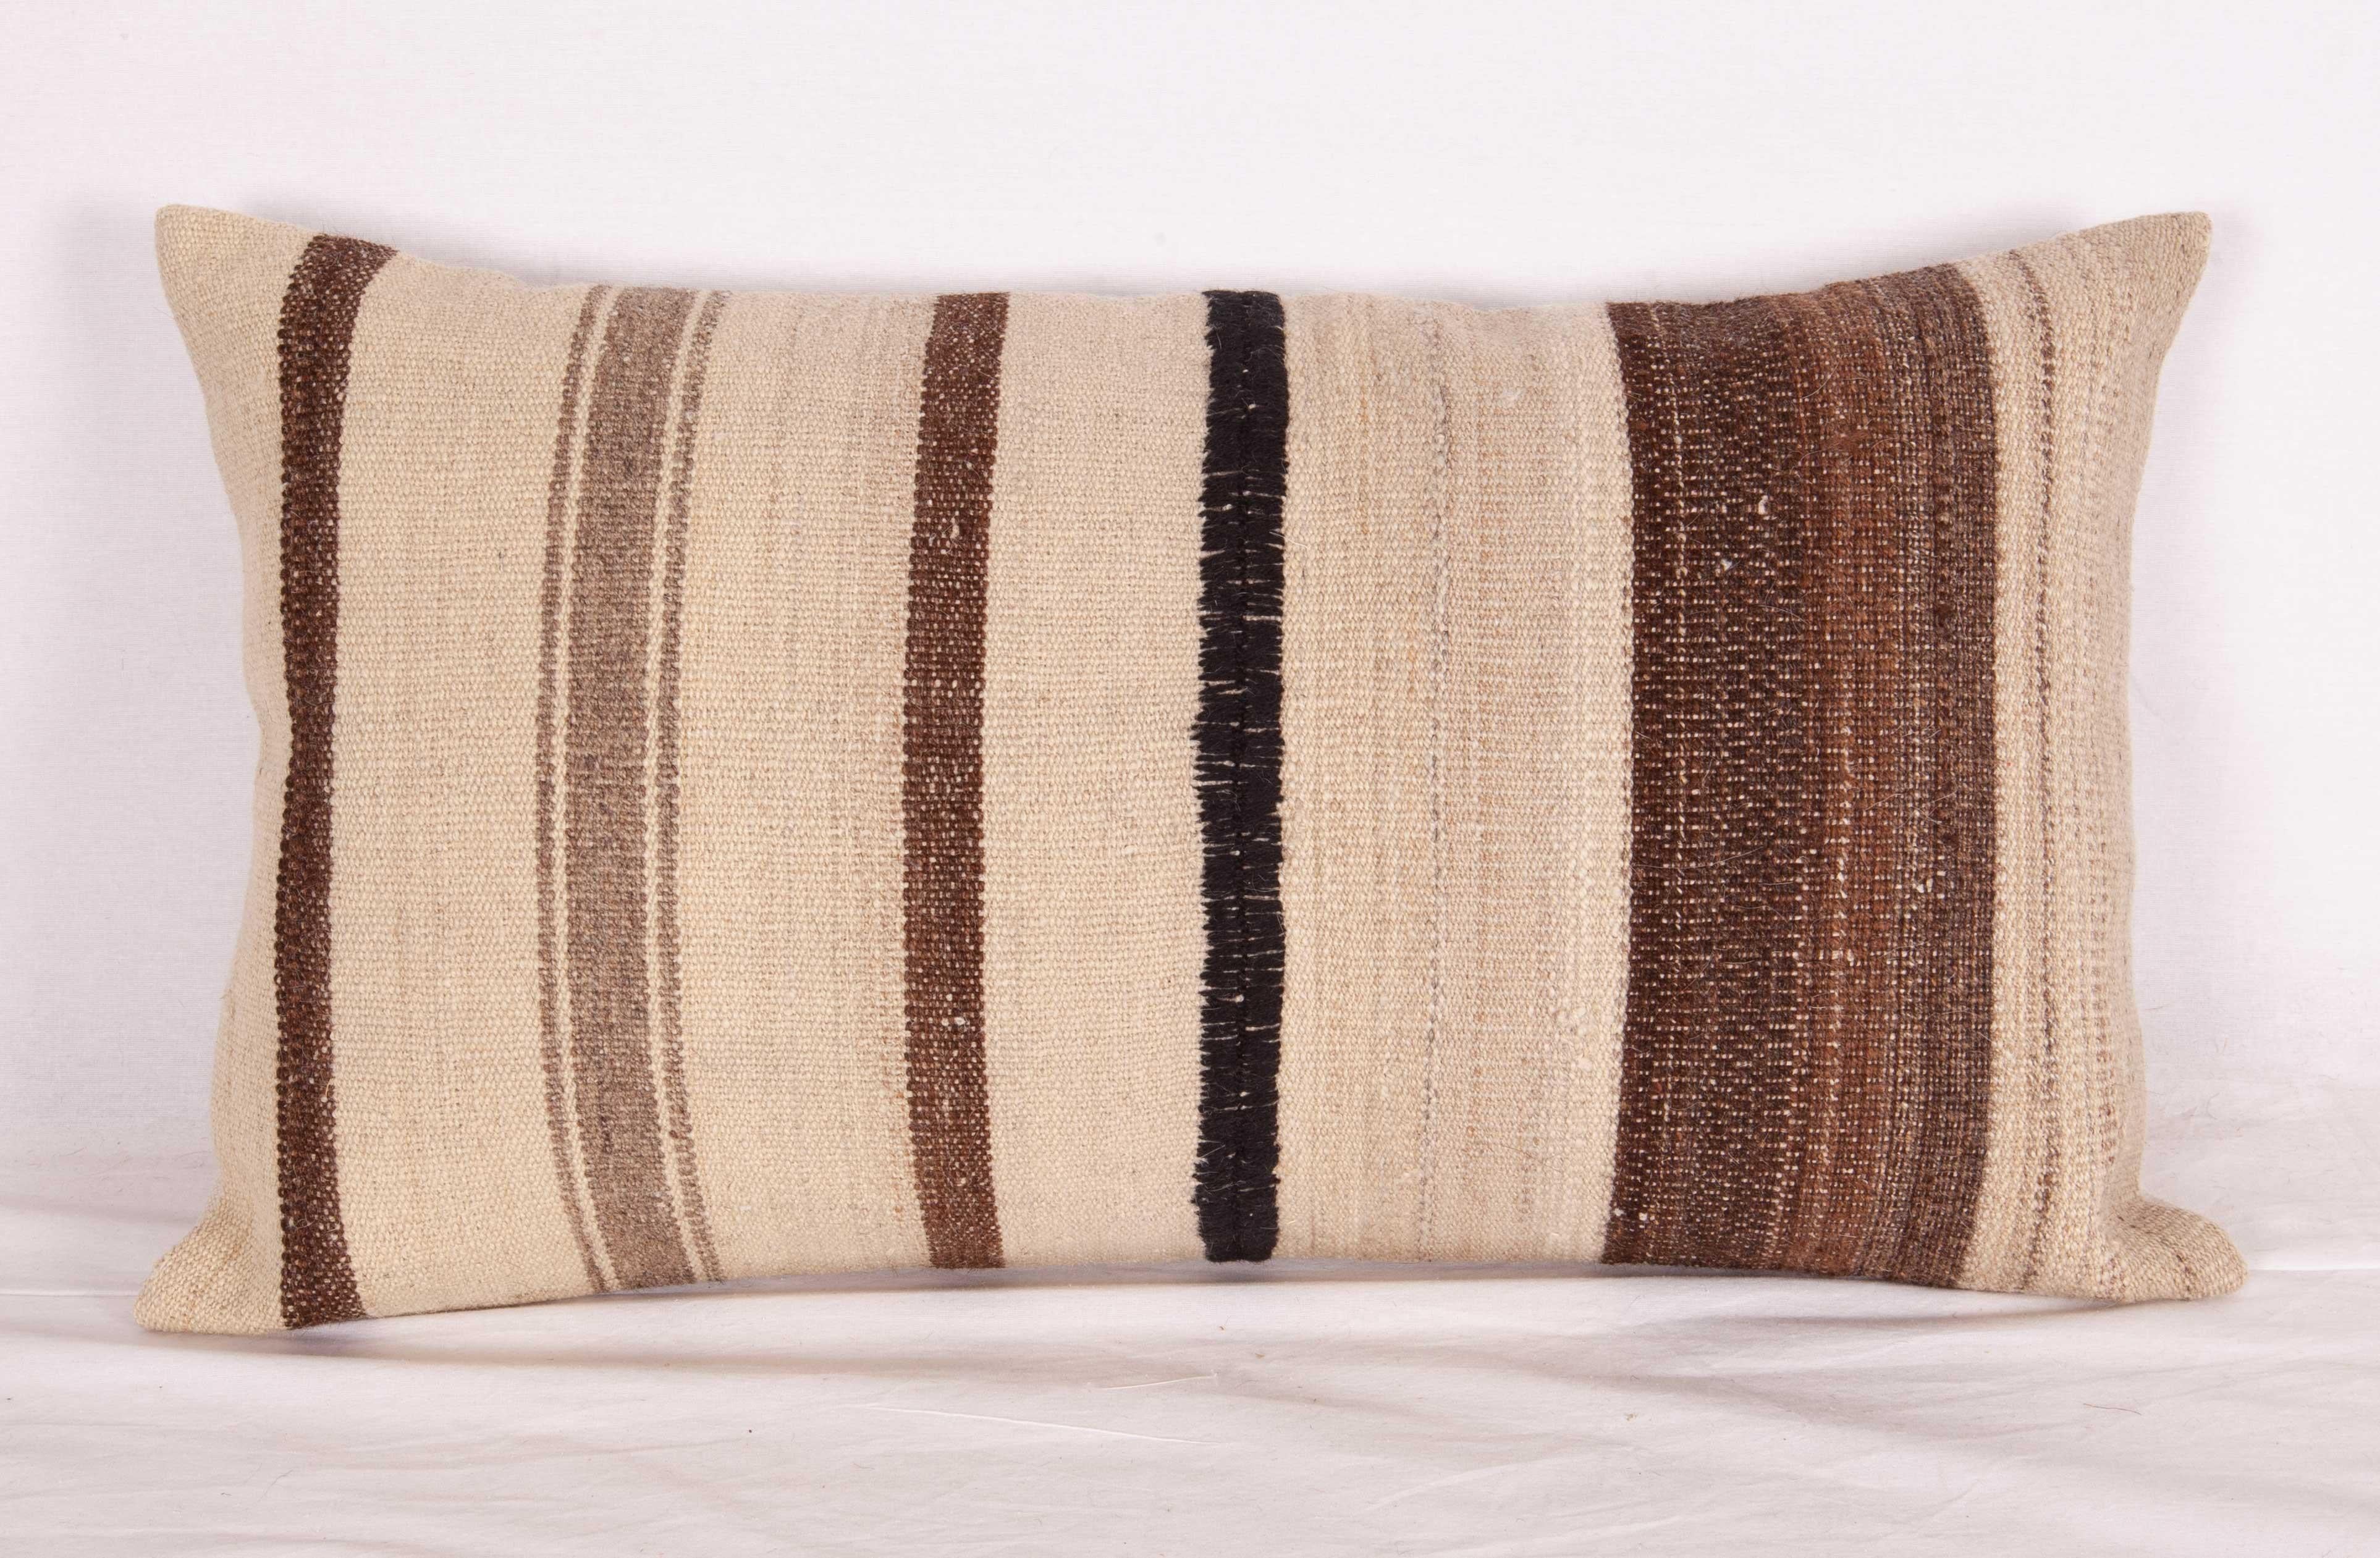 Hand-Woven Kilim Pillow Cases Fashioned from a Vintage Neutral Kilim, Mid-20th Century